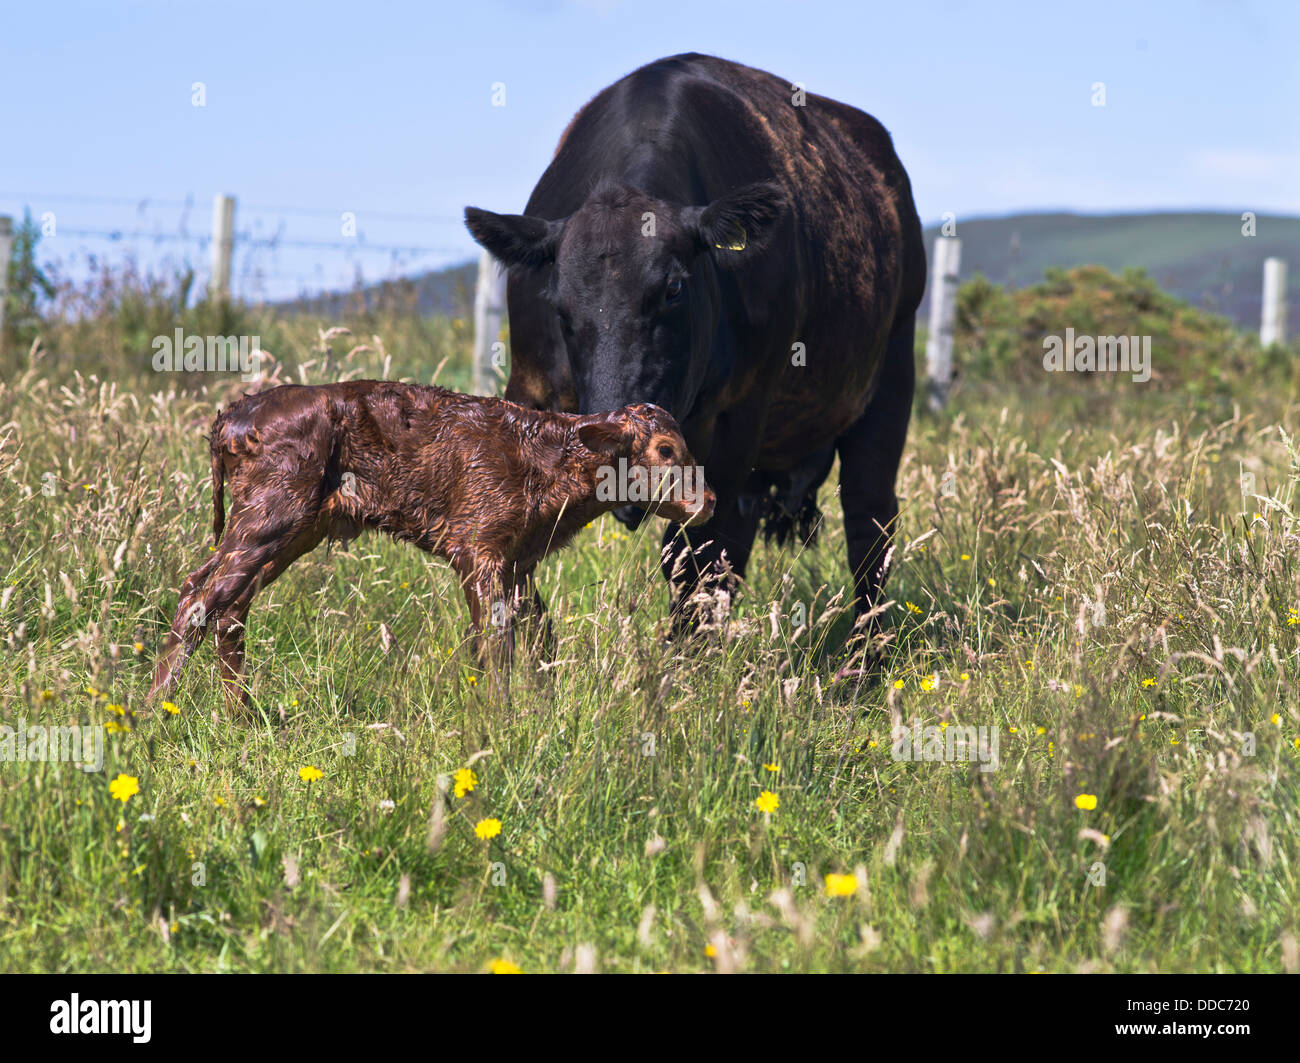 dh COWS UK FARM ANIMALS Aberdeen Angus Crossbreed cow getting newly Born Calb to stand up neugeborenes Standing Baby Stockfoto